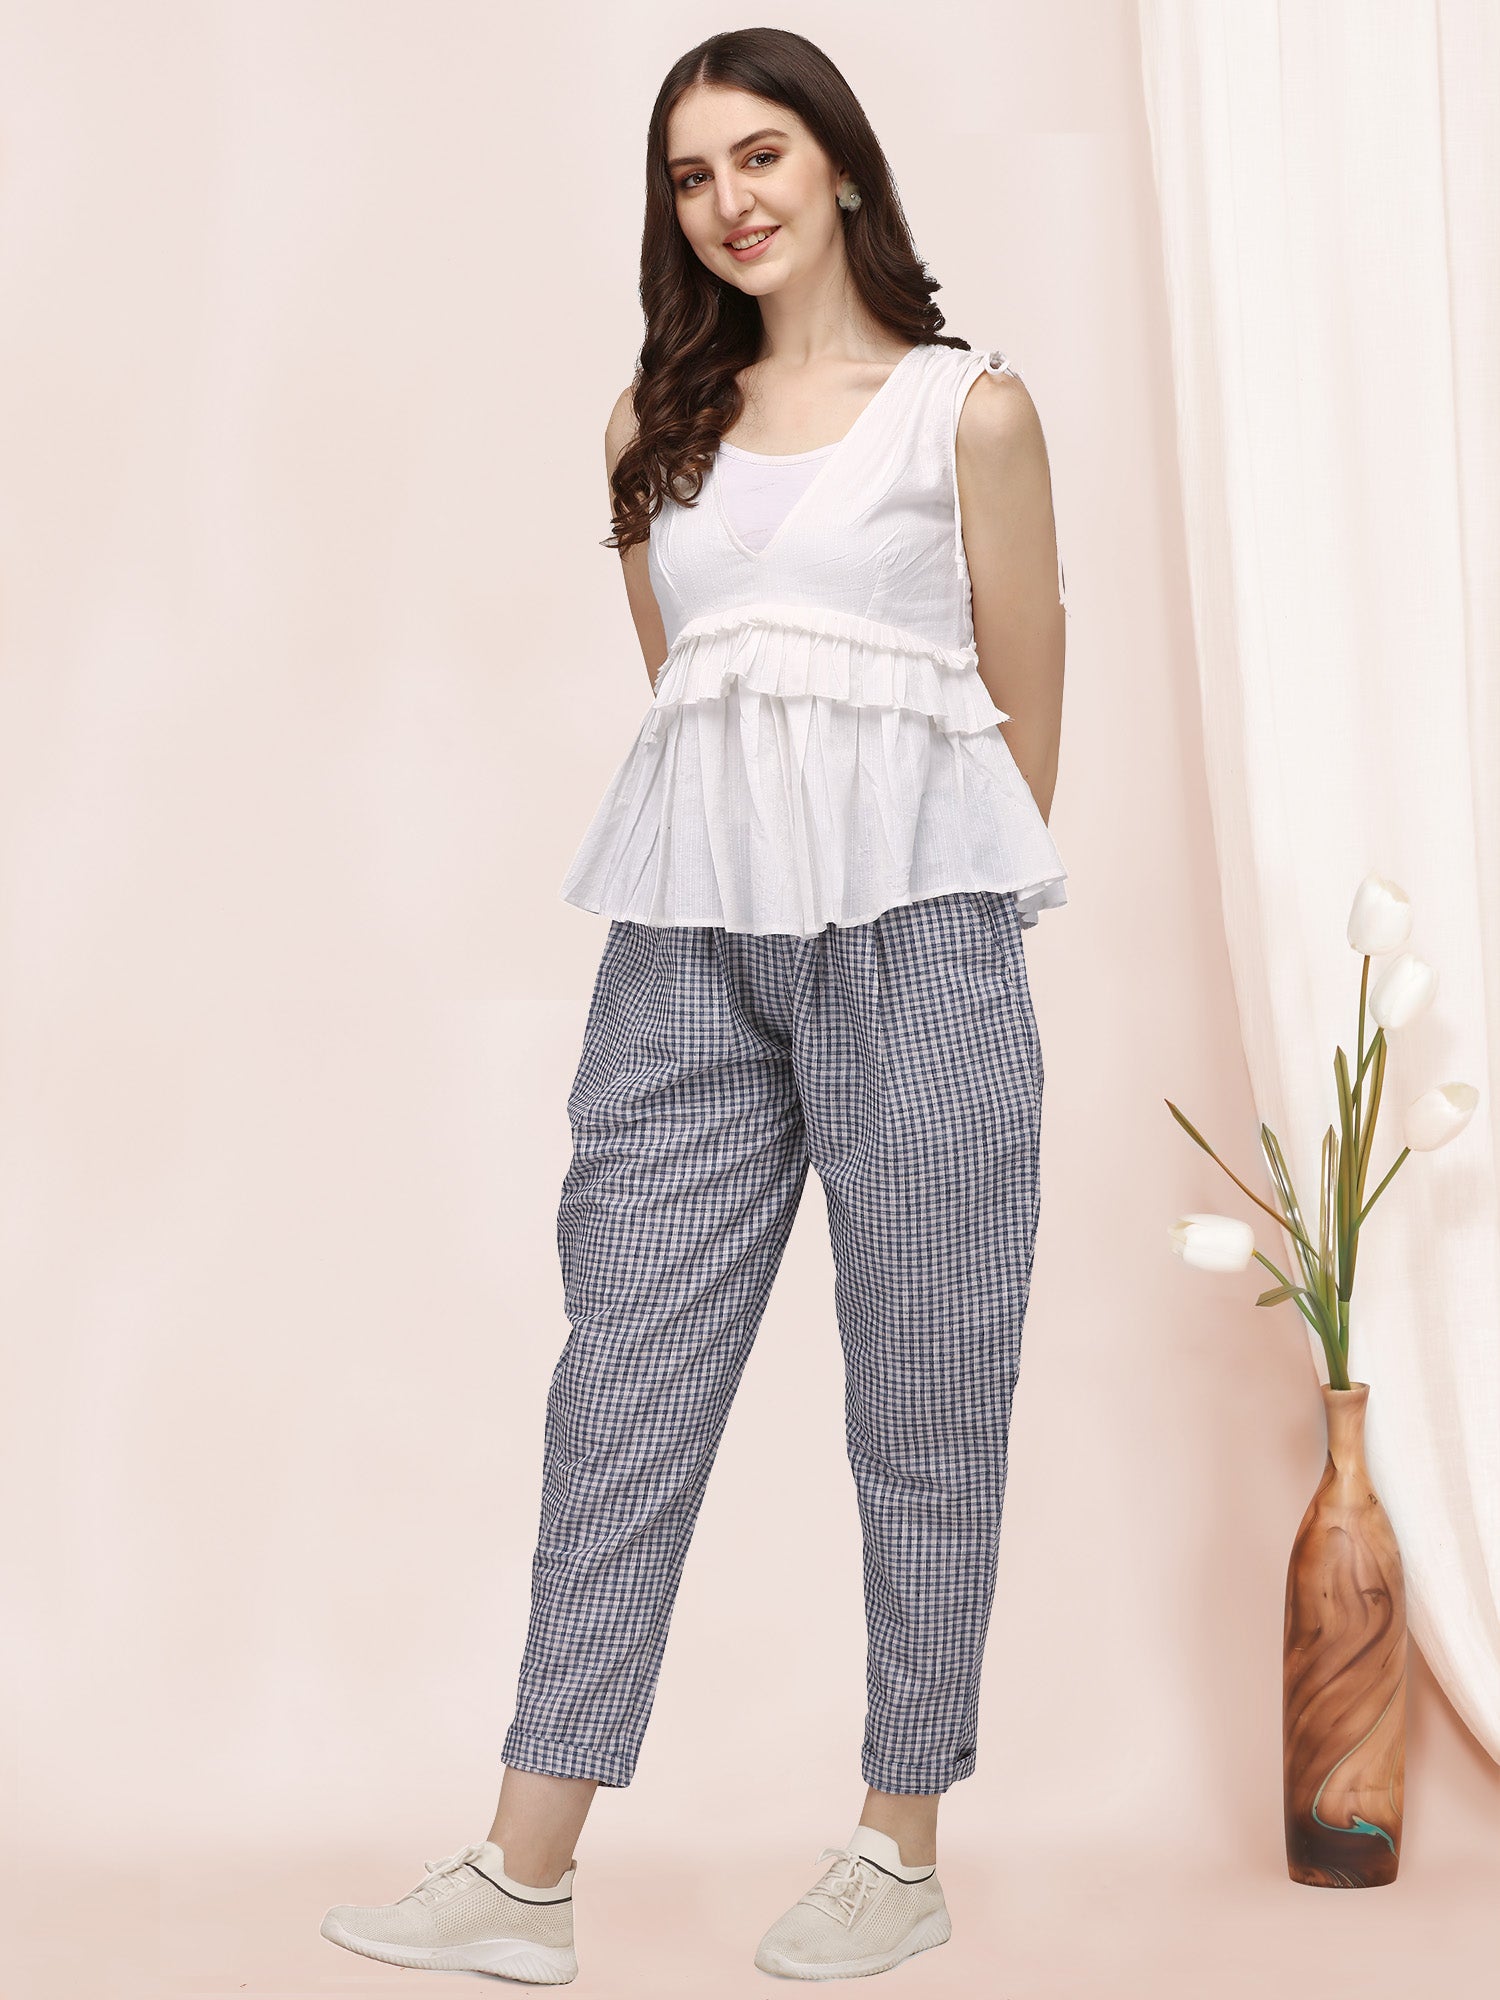 Women's White Sleeveless Ruffle Top Paired With Chex Casual Pant A Perfect Co-ordinates set - MESMORA FASHION